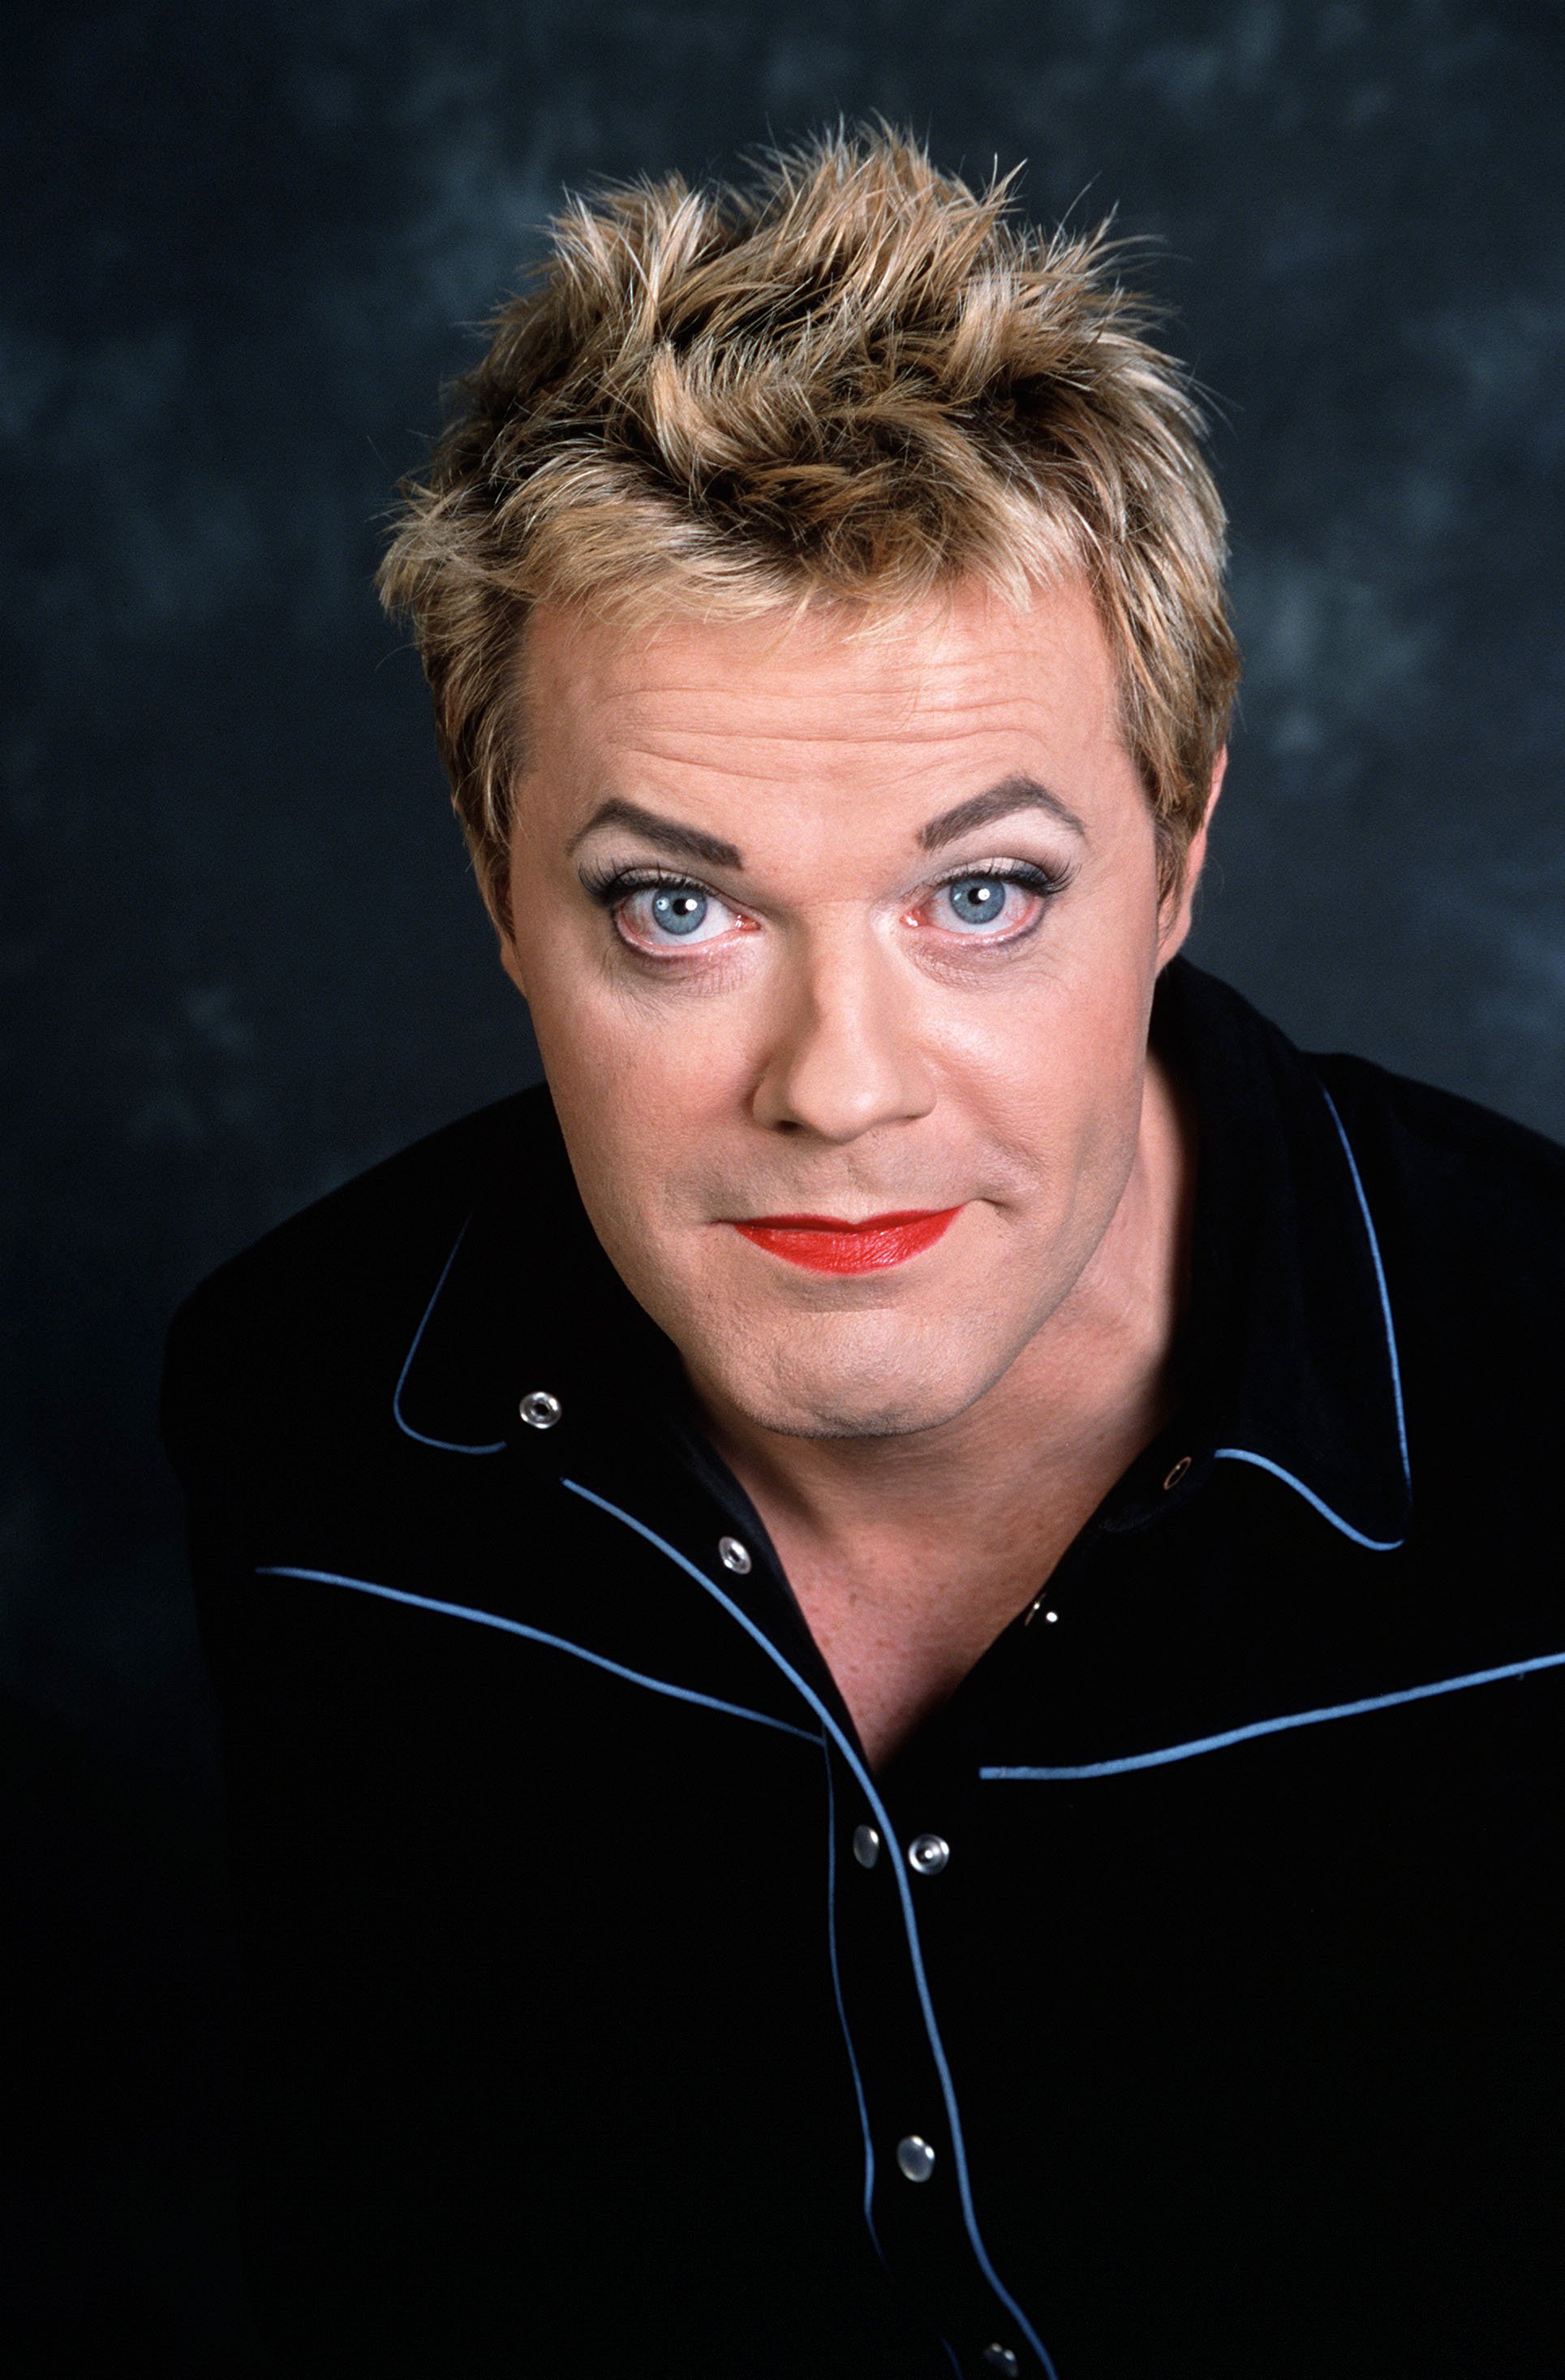 Photo of Eddie Izzard in France on January 12, 2000 | Source: Getty Images